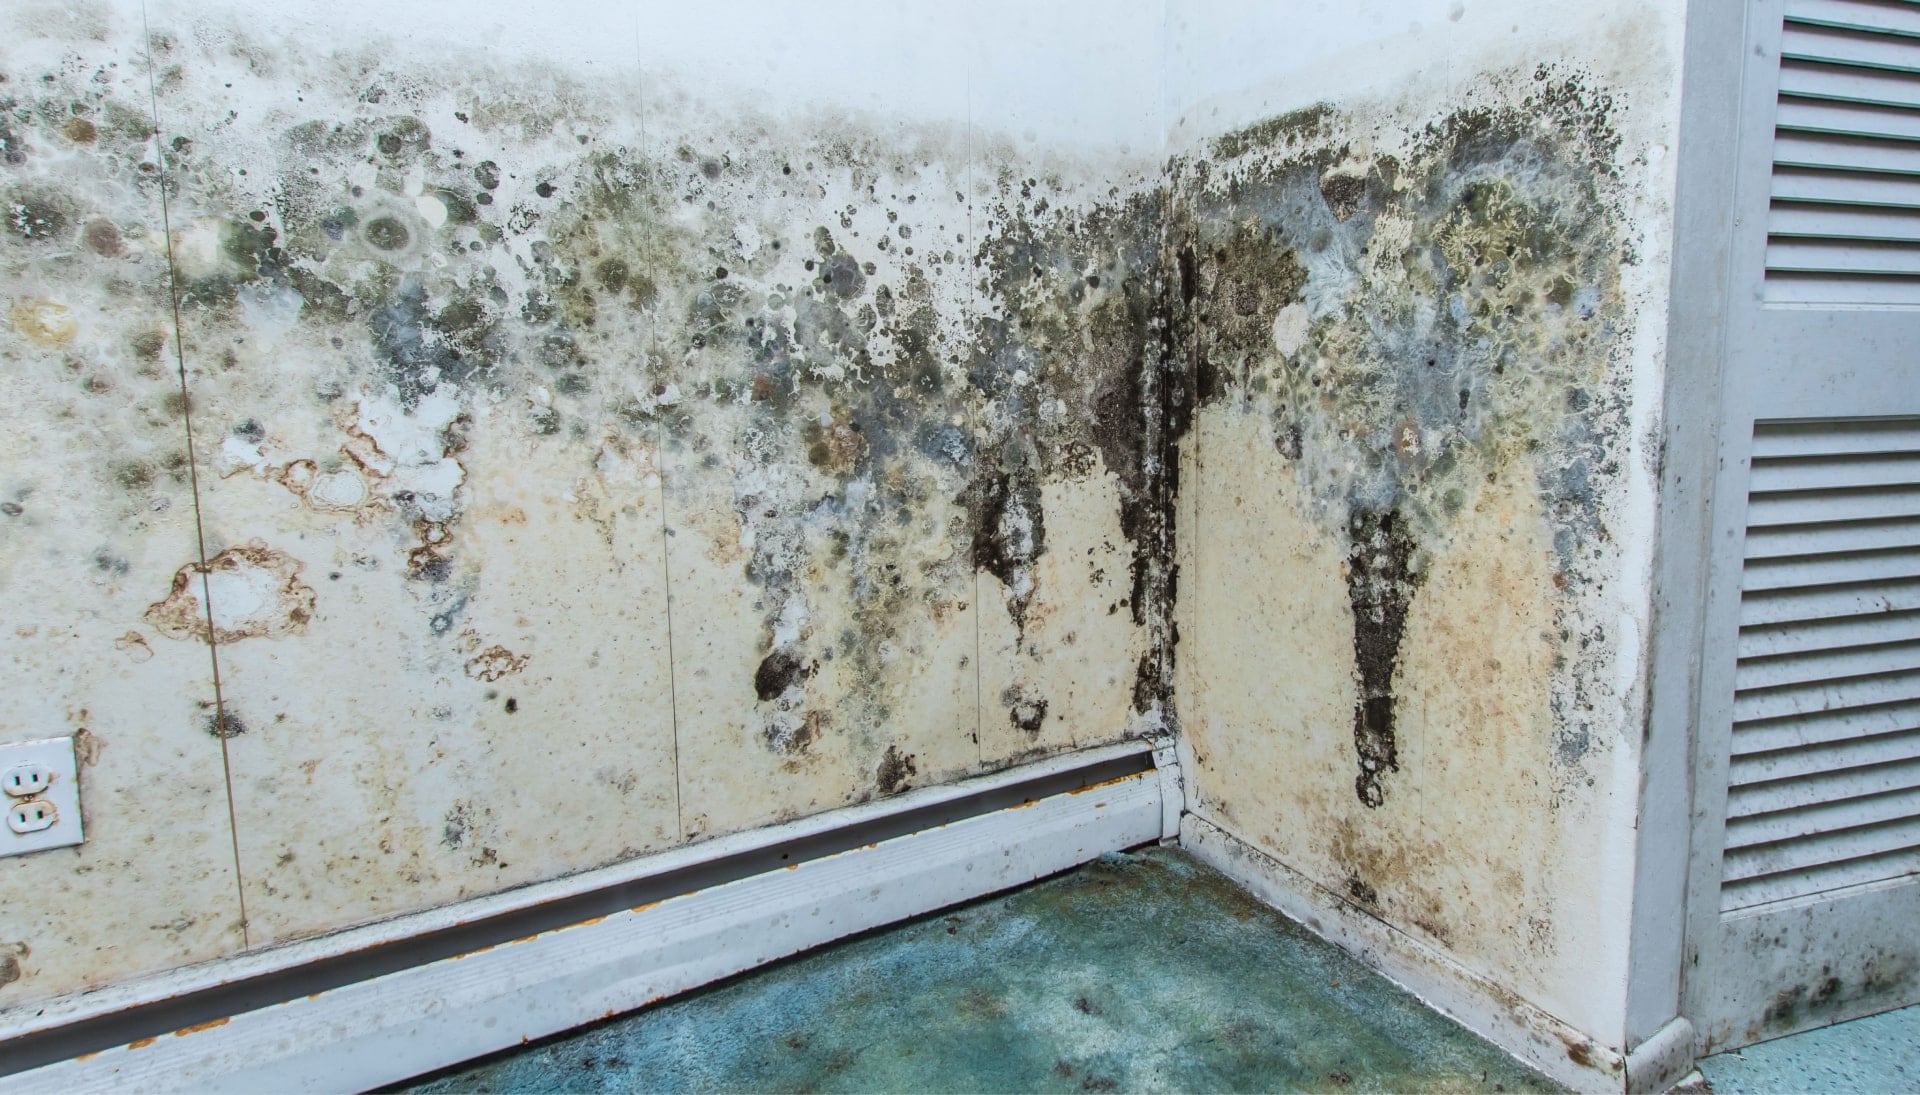 Professional mold removal, odor control, and water damage restoration service in Oakwood, Ohio.